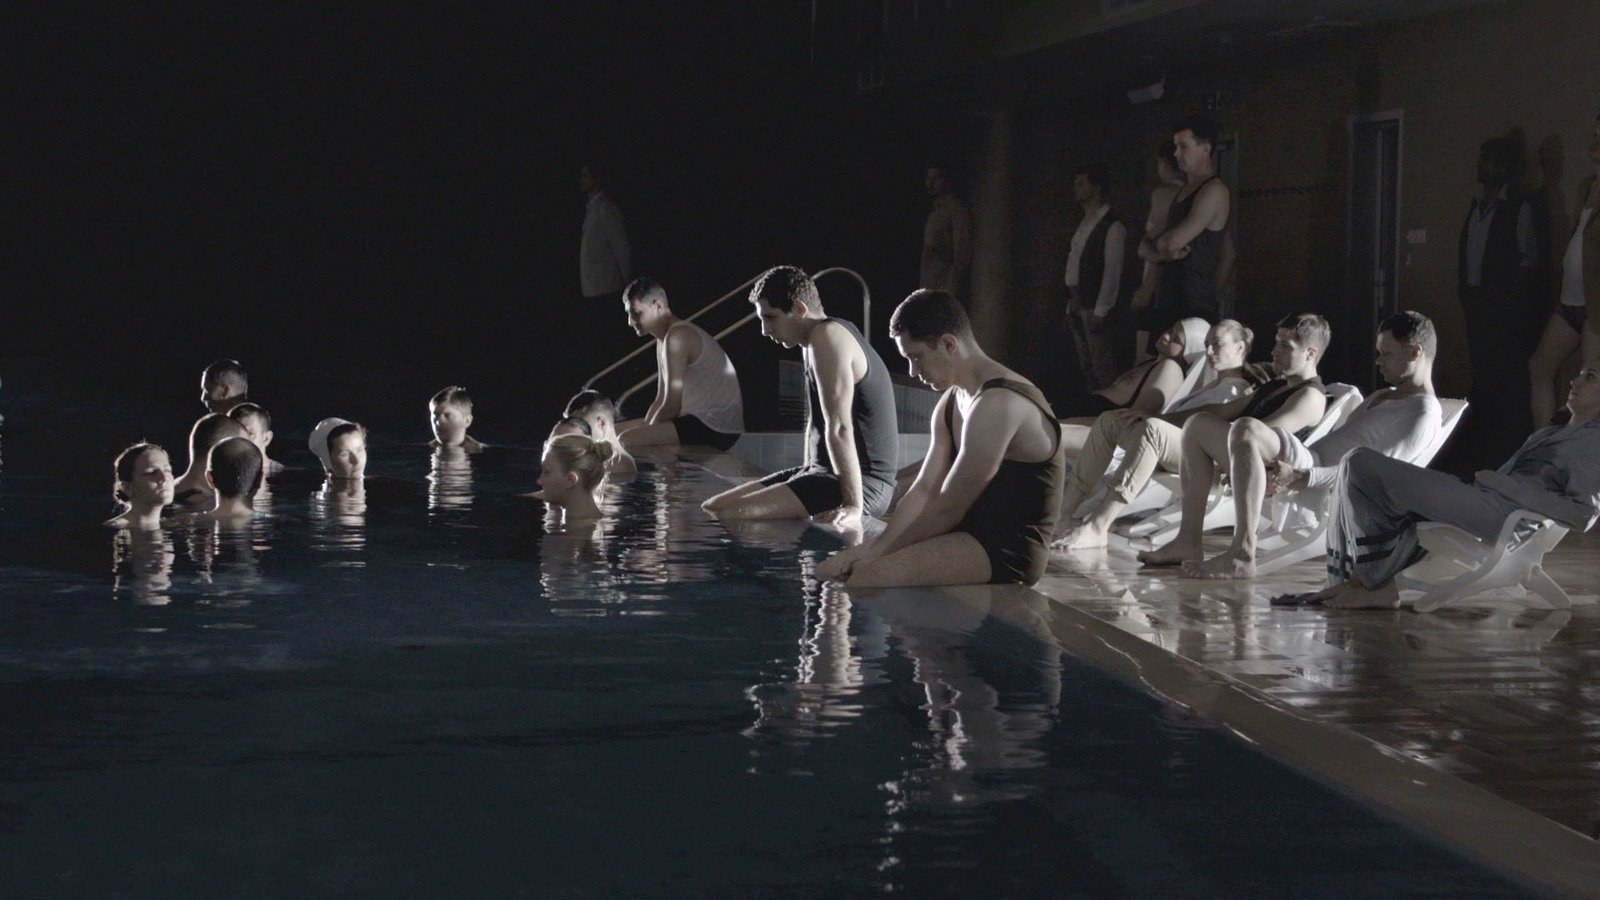 Polina Kanis. Swimming pool. 2015. Video. Courtesy Artwin Gallery.